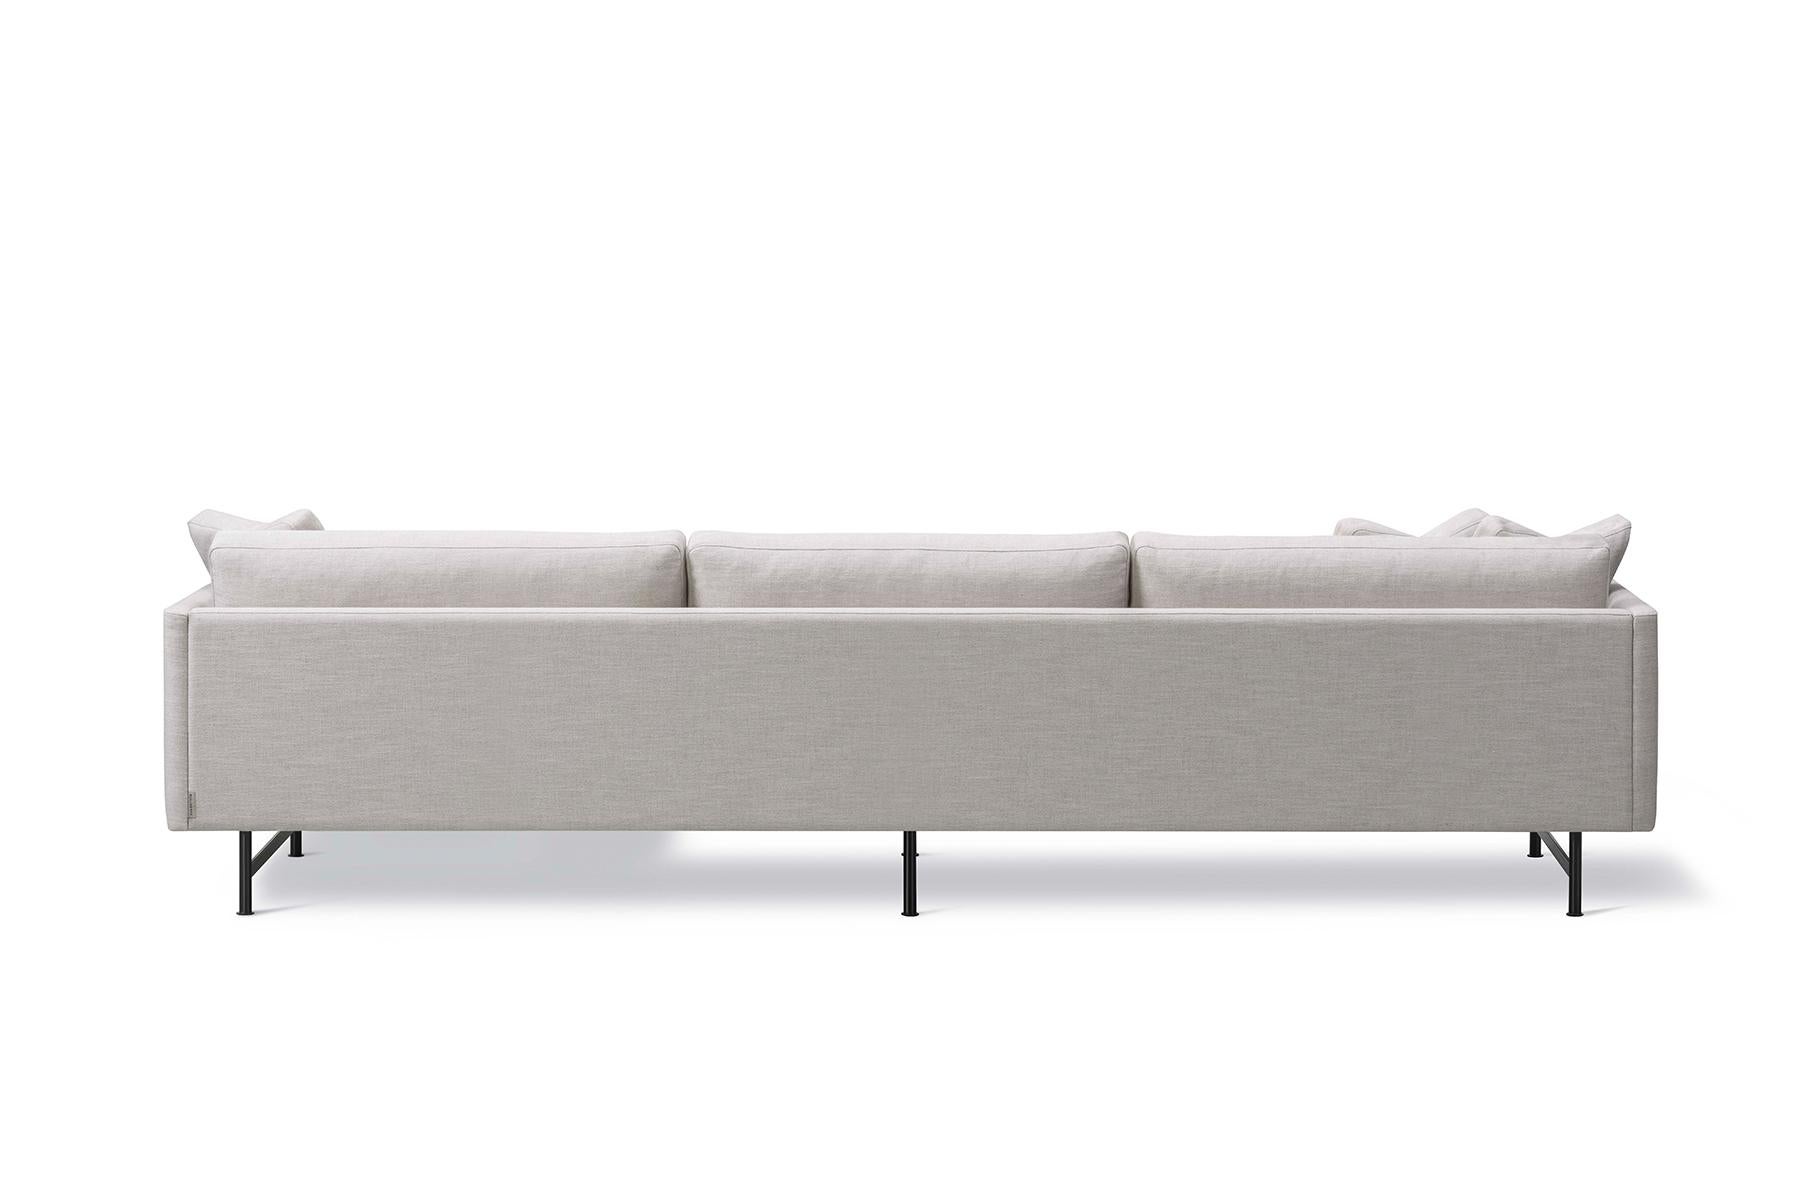 The Hugo Passos Calmo sofa 95, 3-seater, chaise, metal base look is simple and serene in this expansive 3-seater Calmo sofa, where straight lines converge with discrete curved details. Comfy cushions complete the picture in this understated